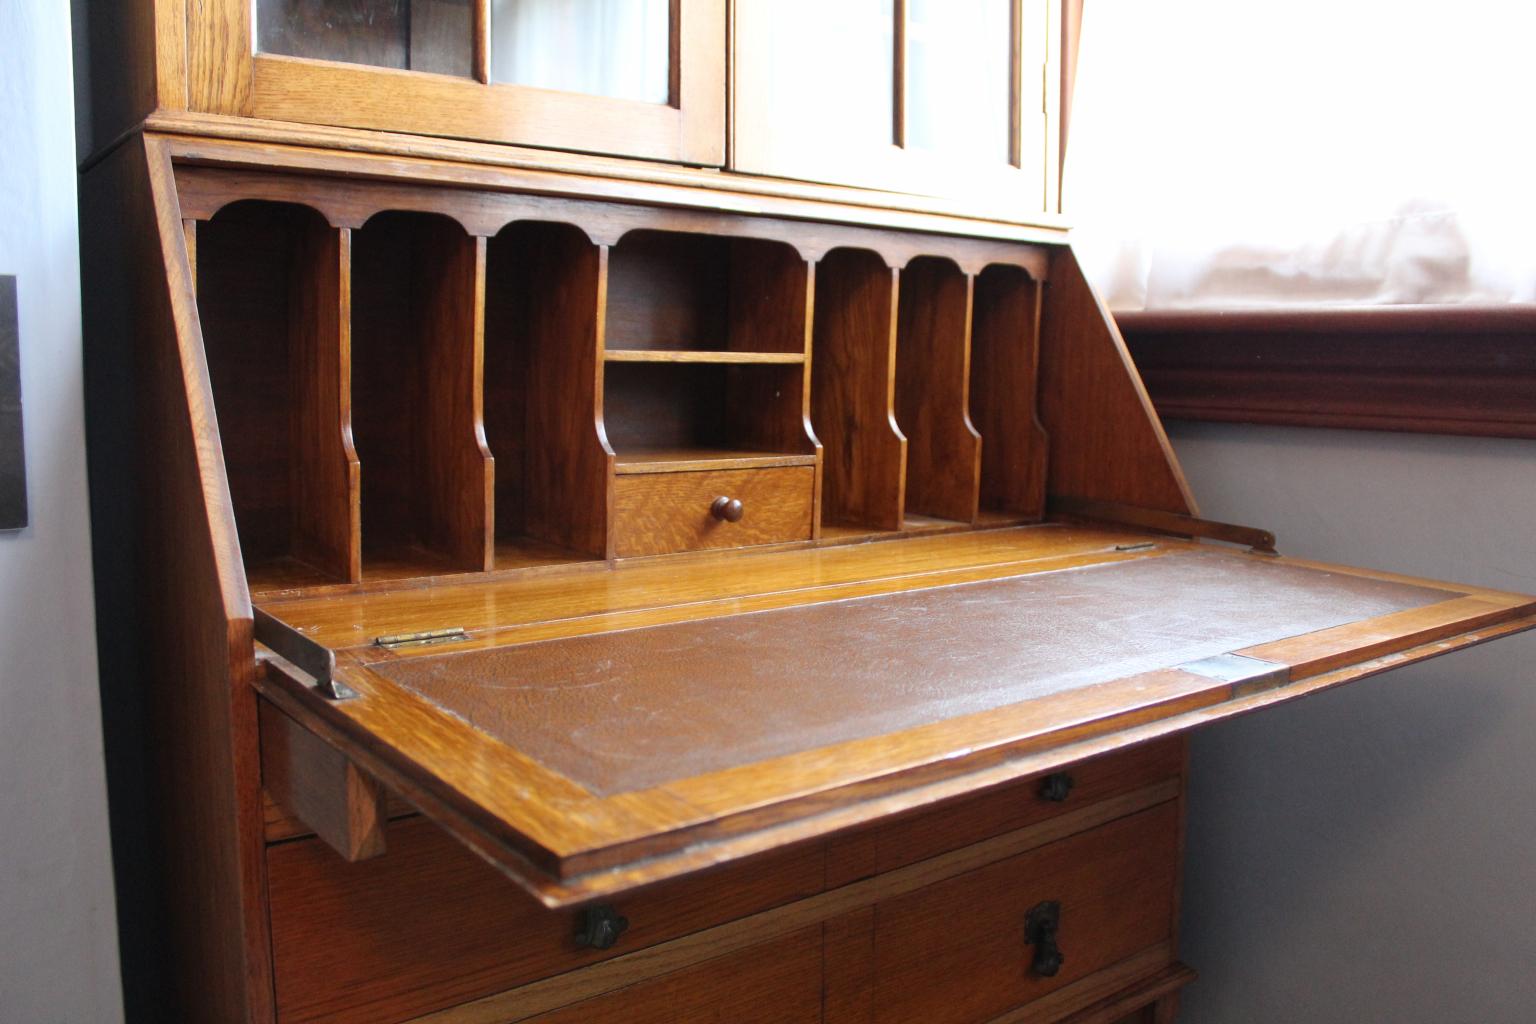 Hardwood Cabinet Foldout Desk Drawers And Key In Dy8 Dudley Fur